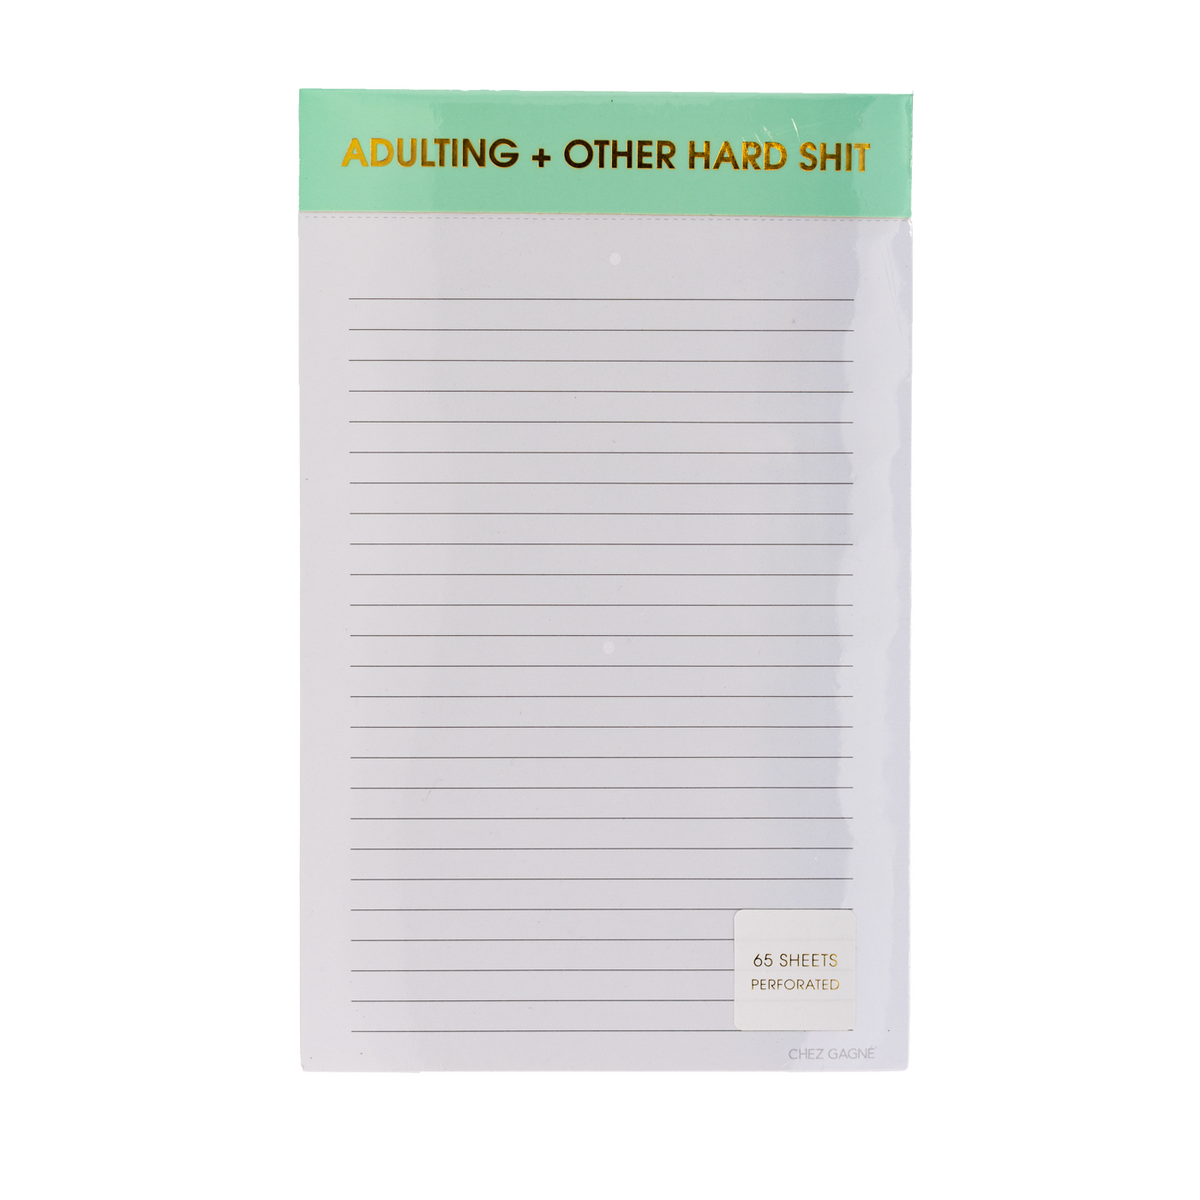 CHEZ GAGNE - Notepad - Adulting + Other Hard #$!@